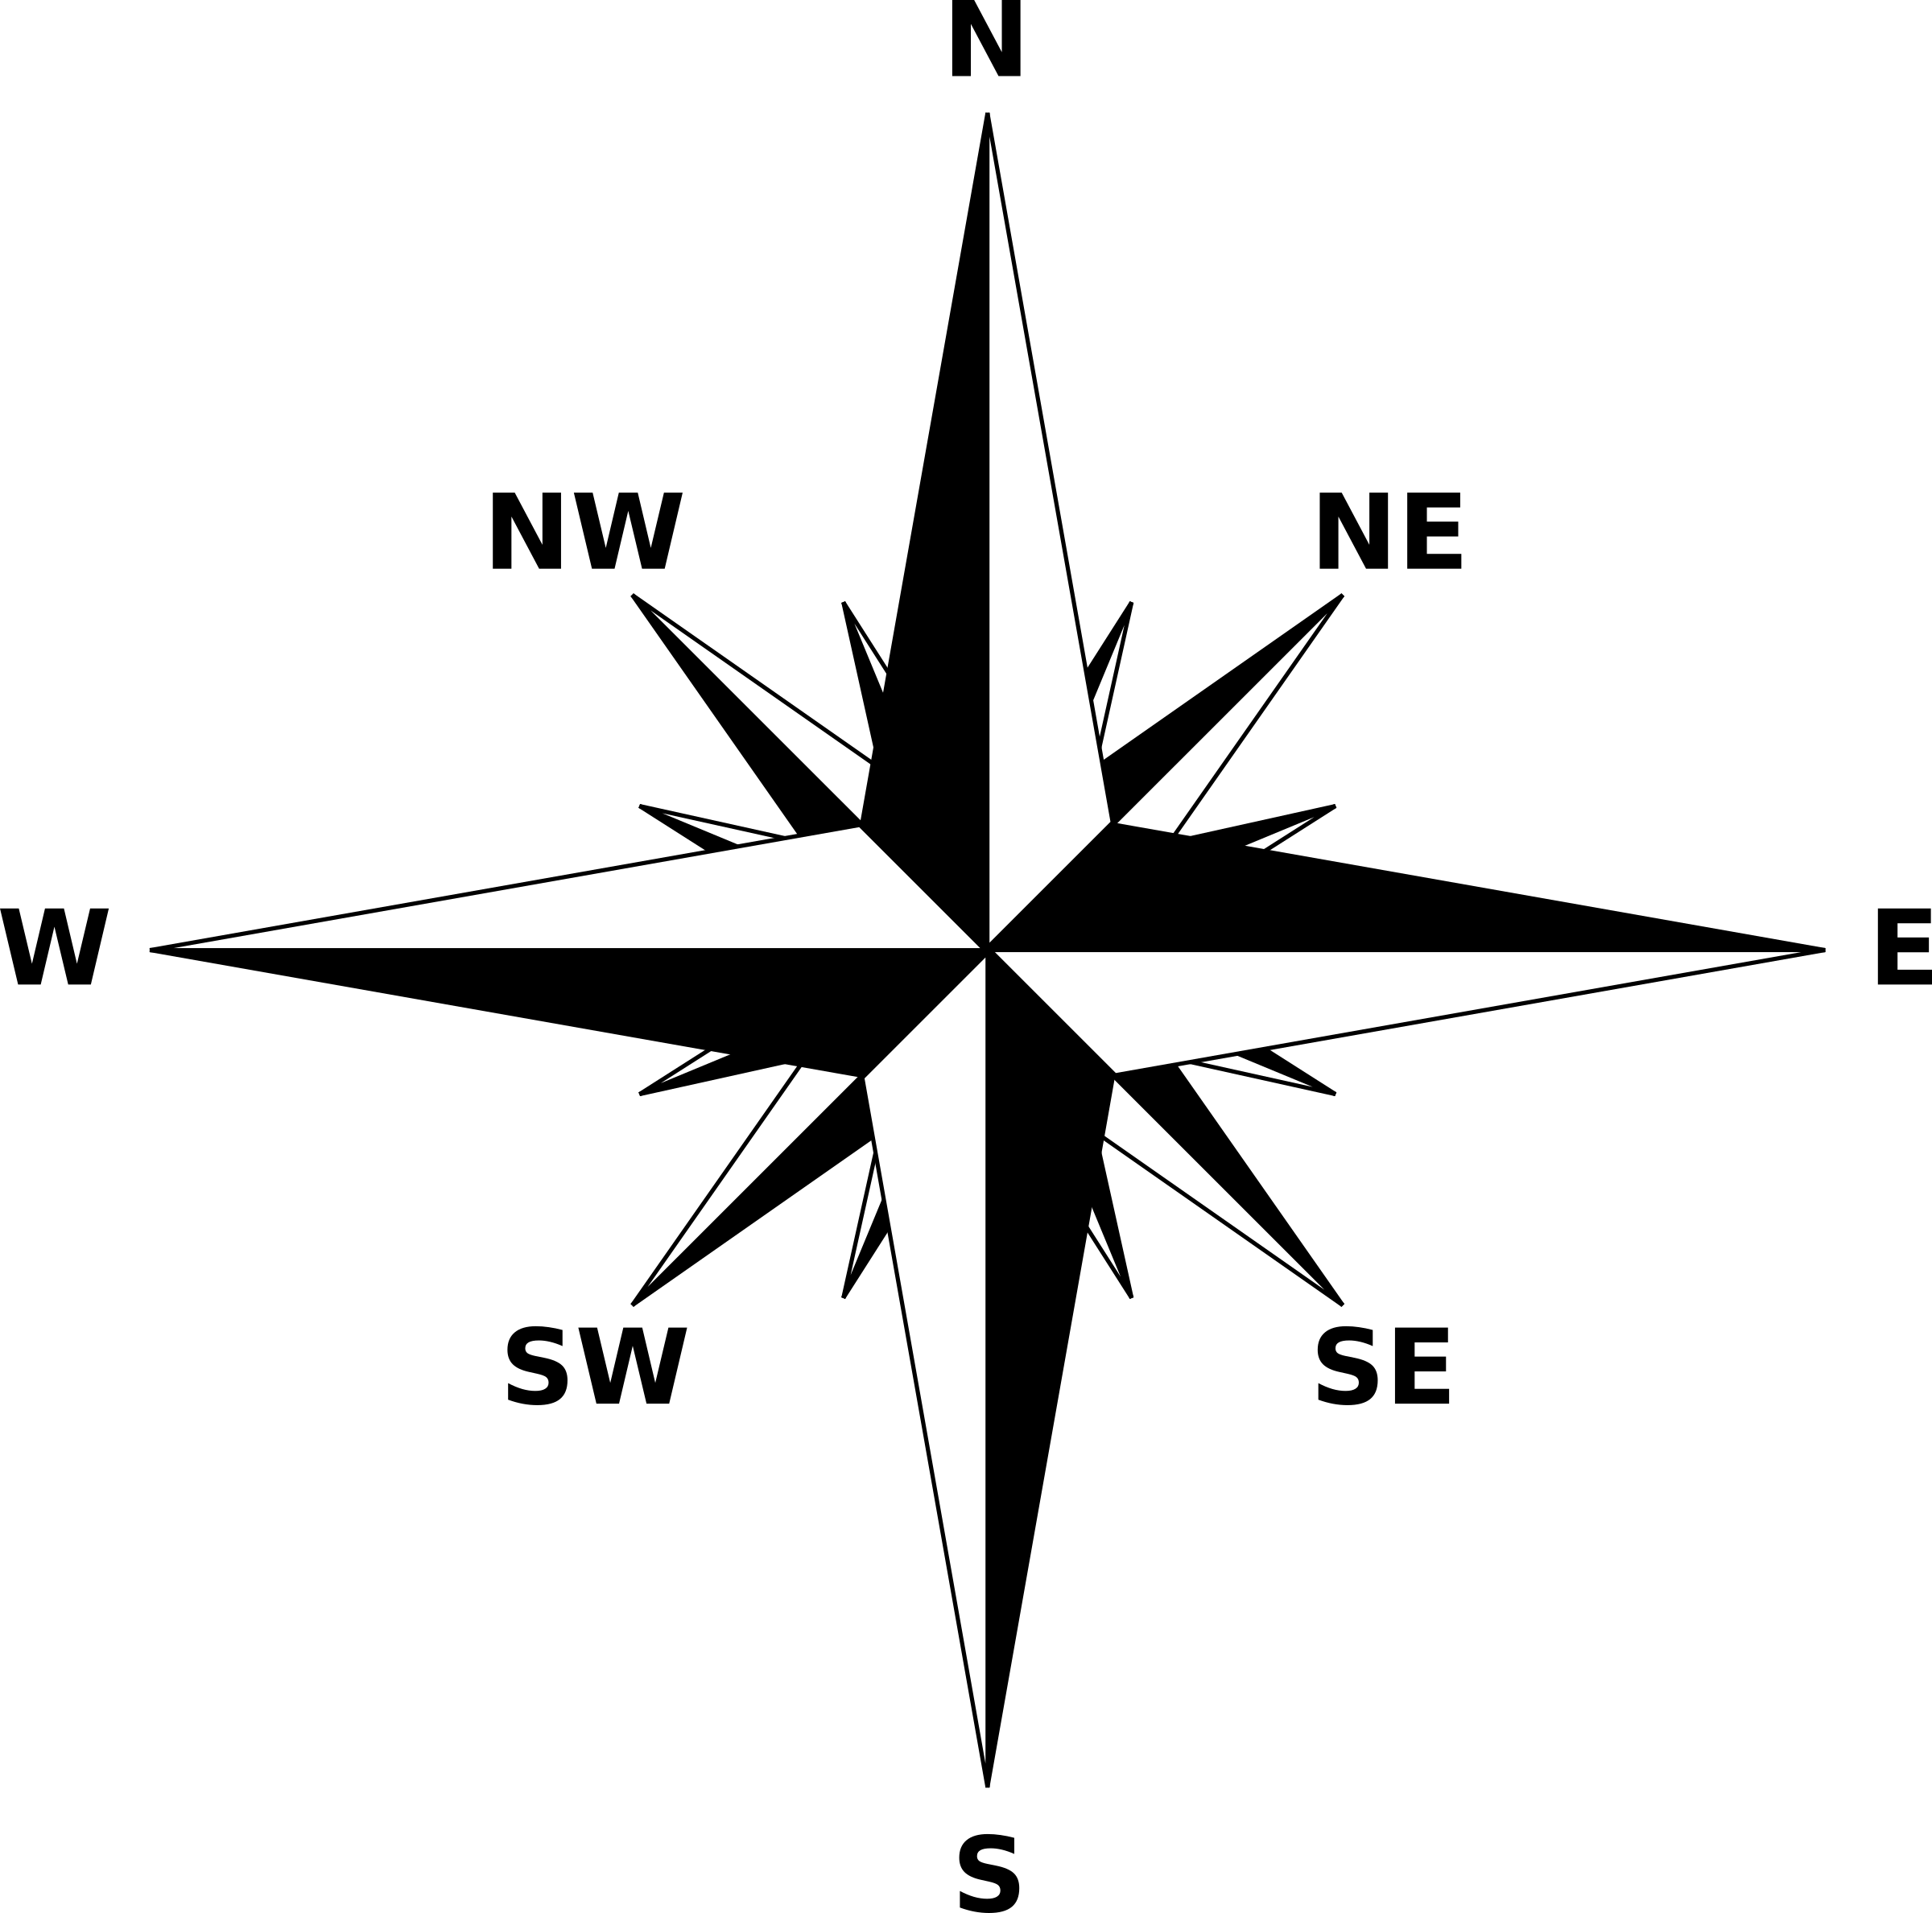 Free Download Compass Rose Image PNG Transparent Background, Free Download